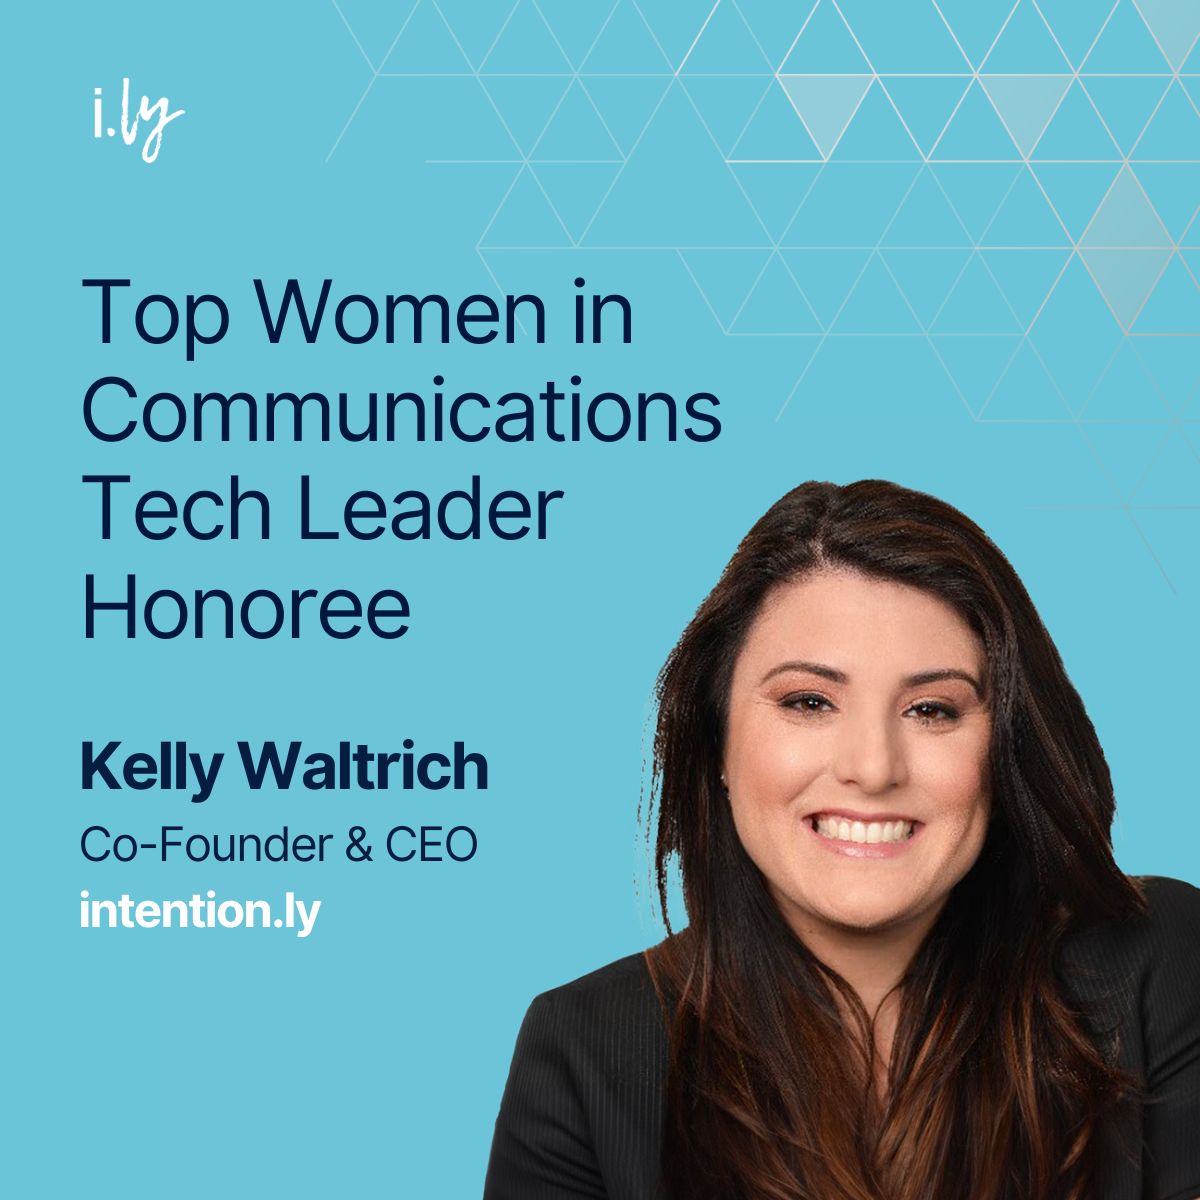 Ending the week on a high note! 🌟 Our co-founder & CEO @kdubs_waltrich has earned a well-deserved spot as an honoree in the Tech Leaders category of @RaganComms Top Women in Communications Awards! 👏 Check out the full list of #WomenInCommunications here: ragan.com/awards/events/…